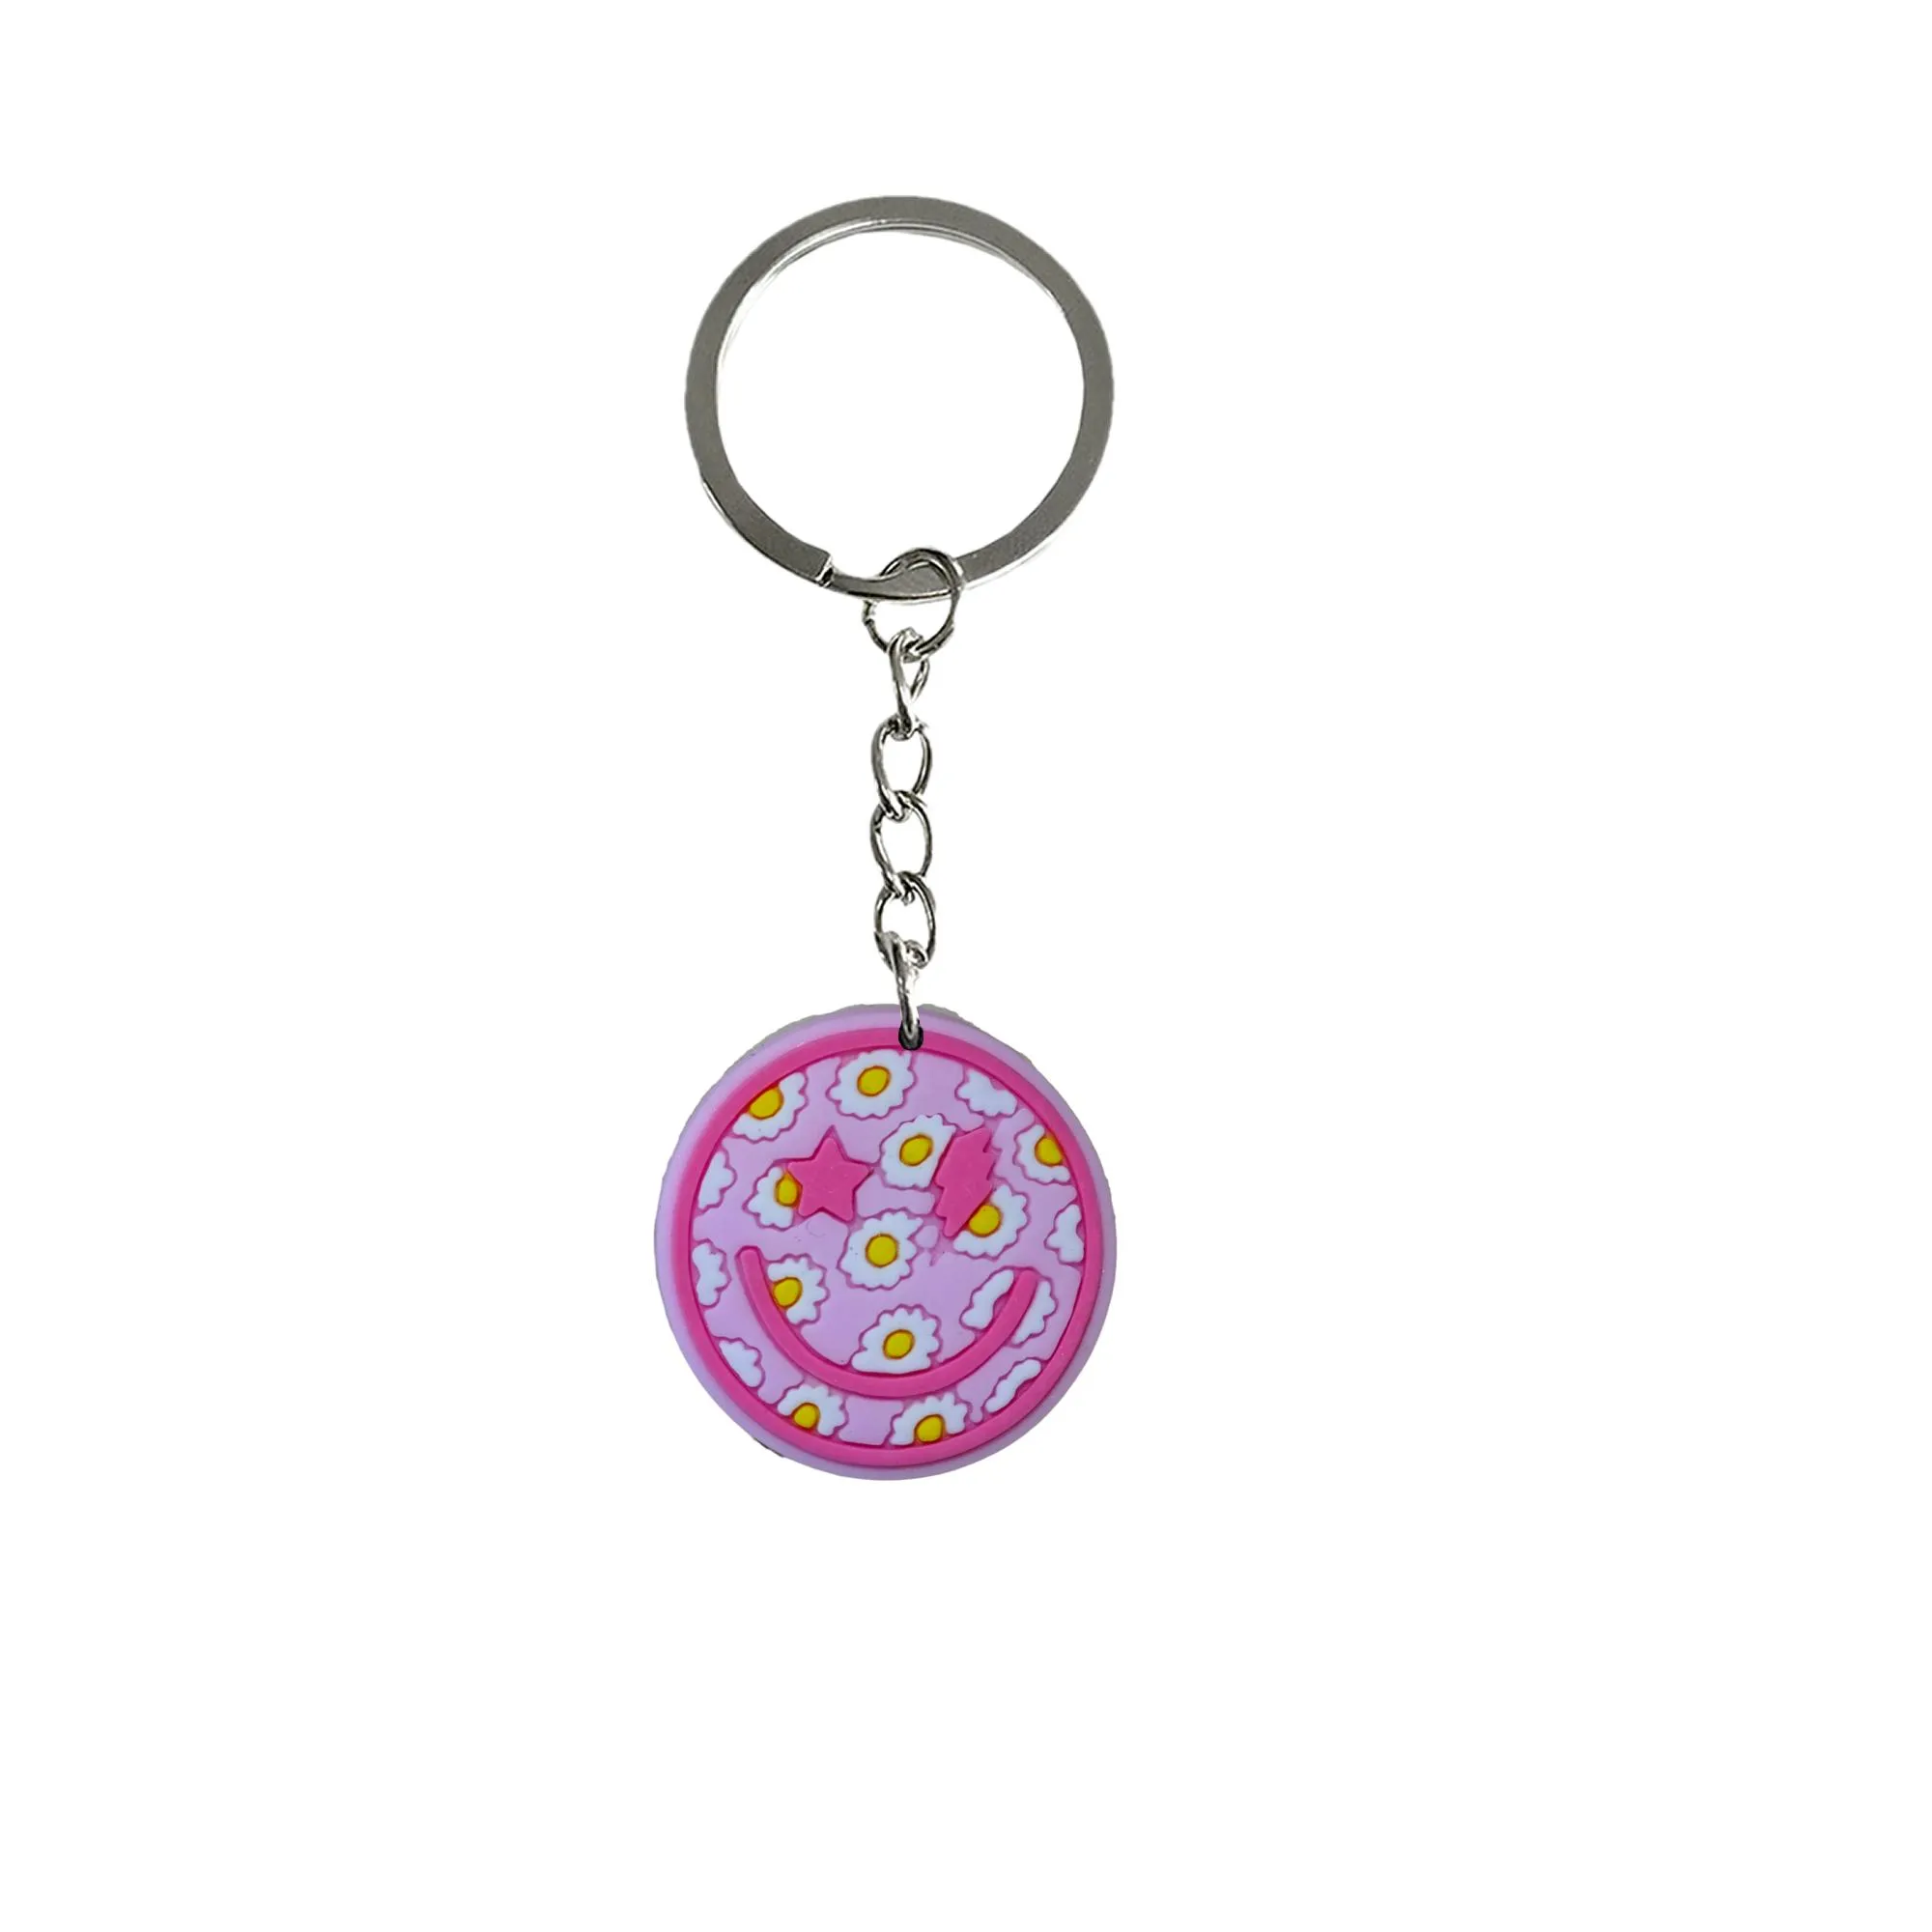 pink keychain key ring for girls goodie bag stuffers supplies anime cool keychains backpacks keyring suitable schoolbag school day birthday party gift backpack shoulder pendant accessories charm chain christmas fans